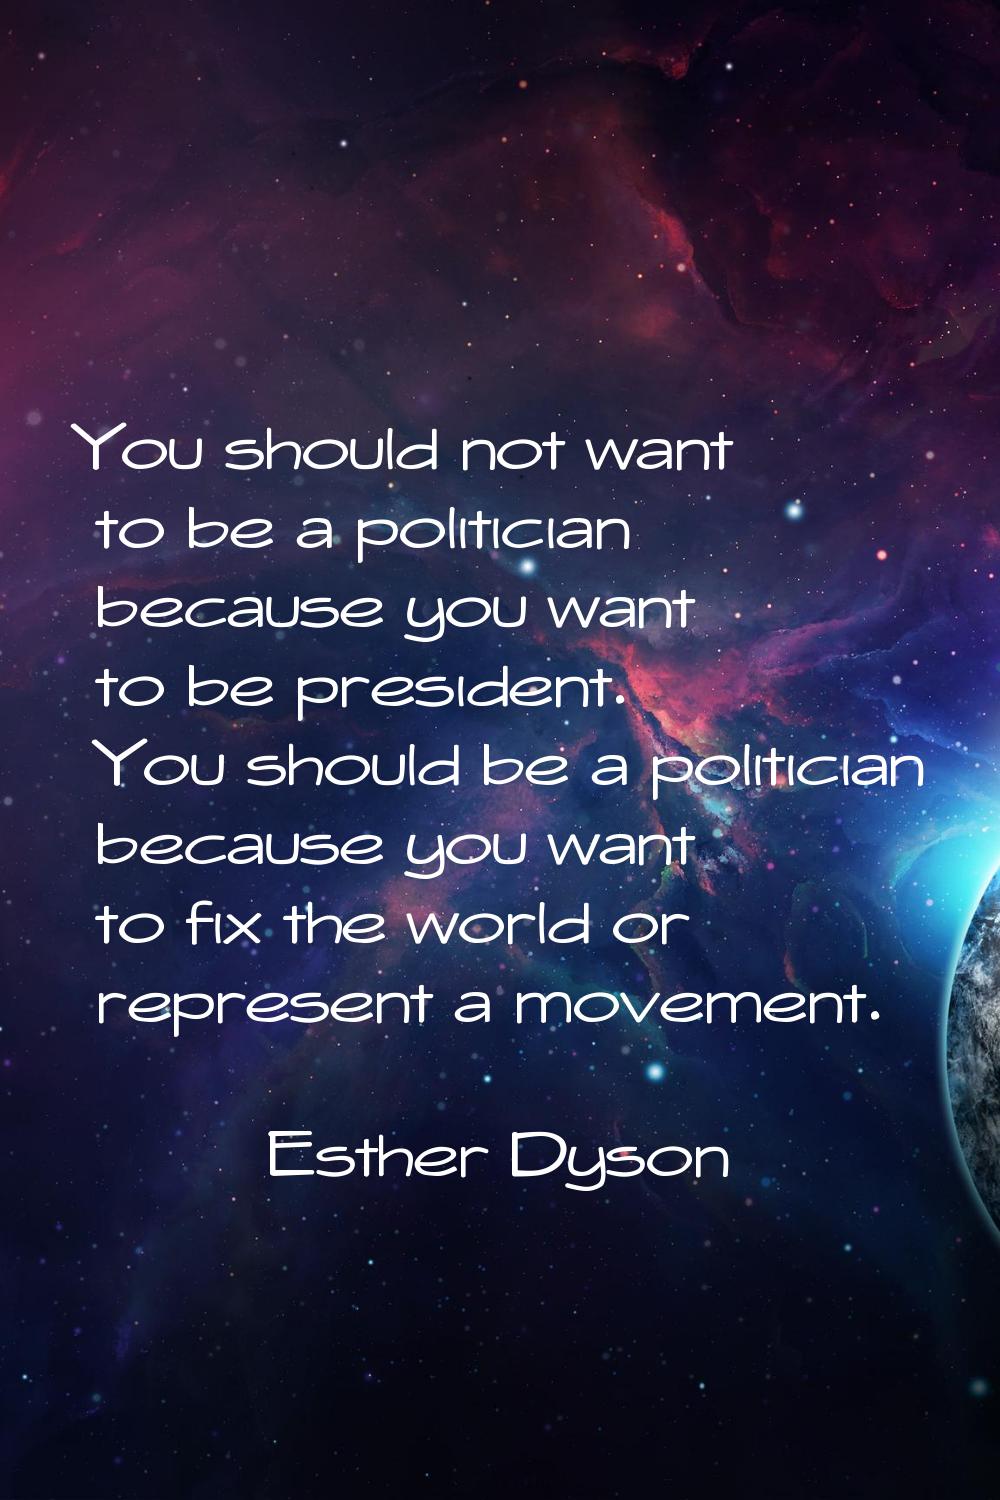 You should not want to be a politician because you want to be president. You should be a politician